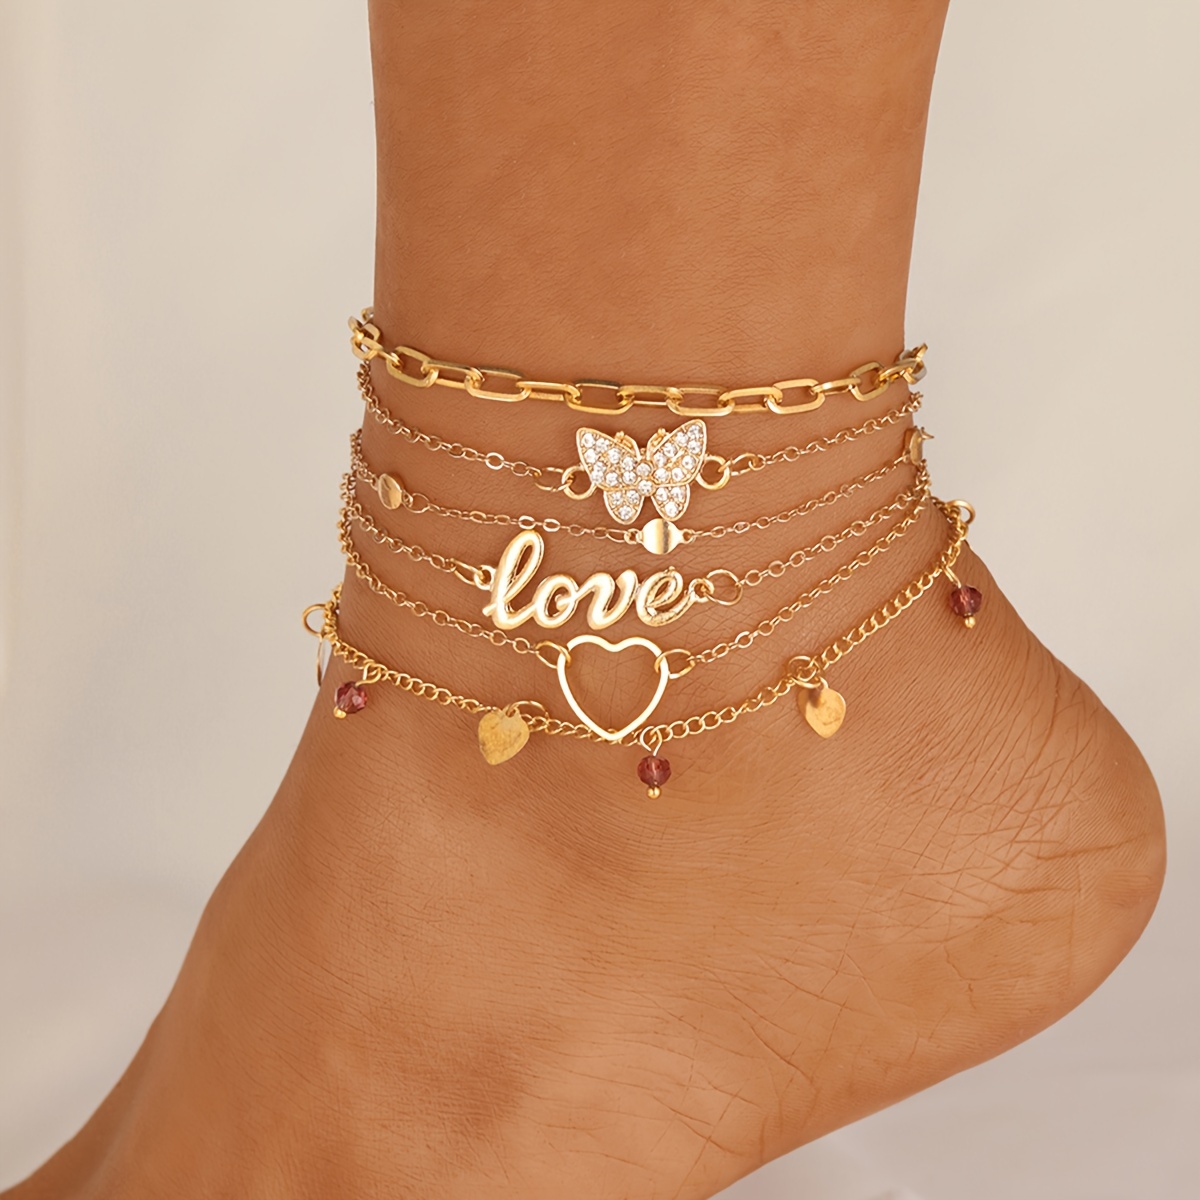 

6-piece Set Golden Anklets With Rhinestones, Heart & Butterfly Charms - Simple & Elegant Ankle Bracelets For Women, Perfect For Date, Vacation, Party & Everyday Wear Gift